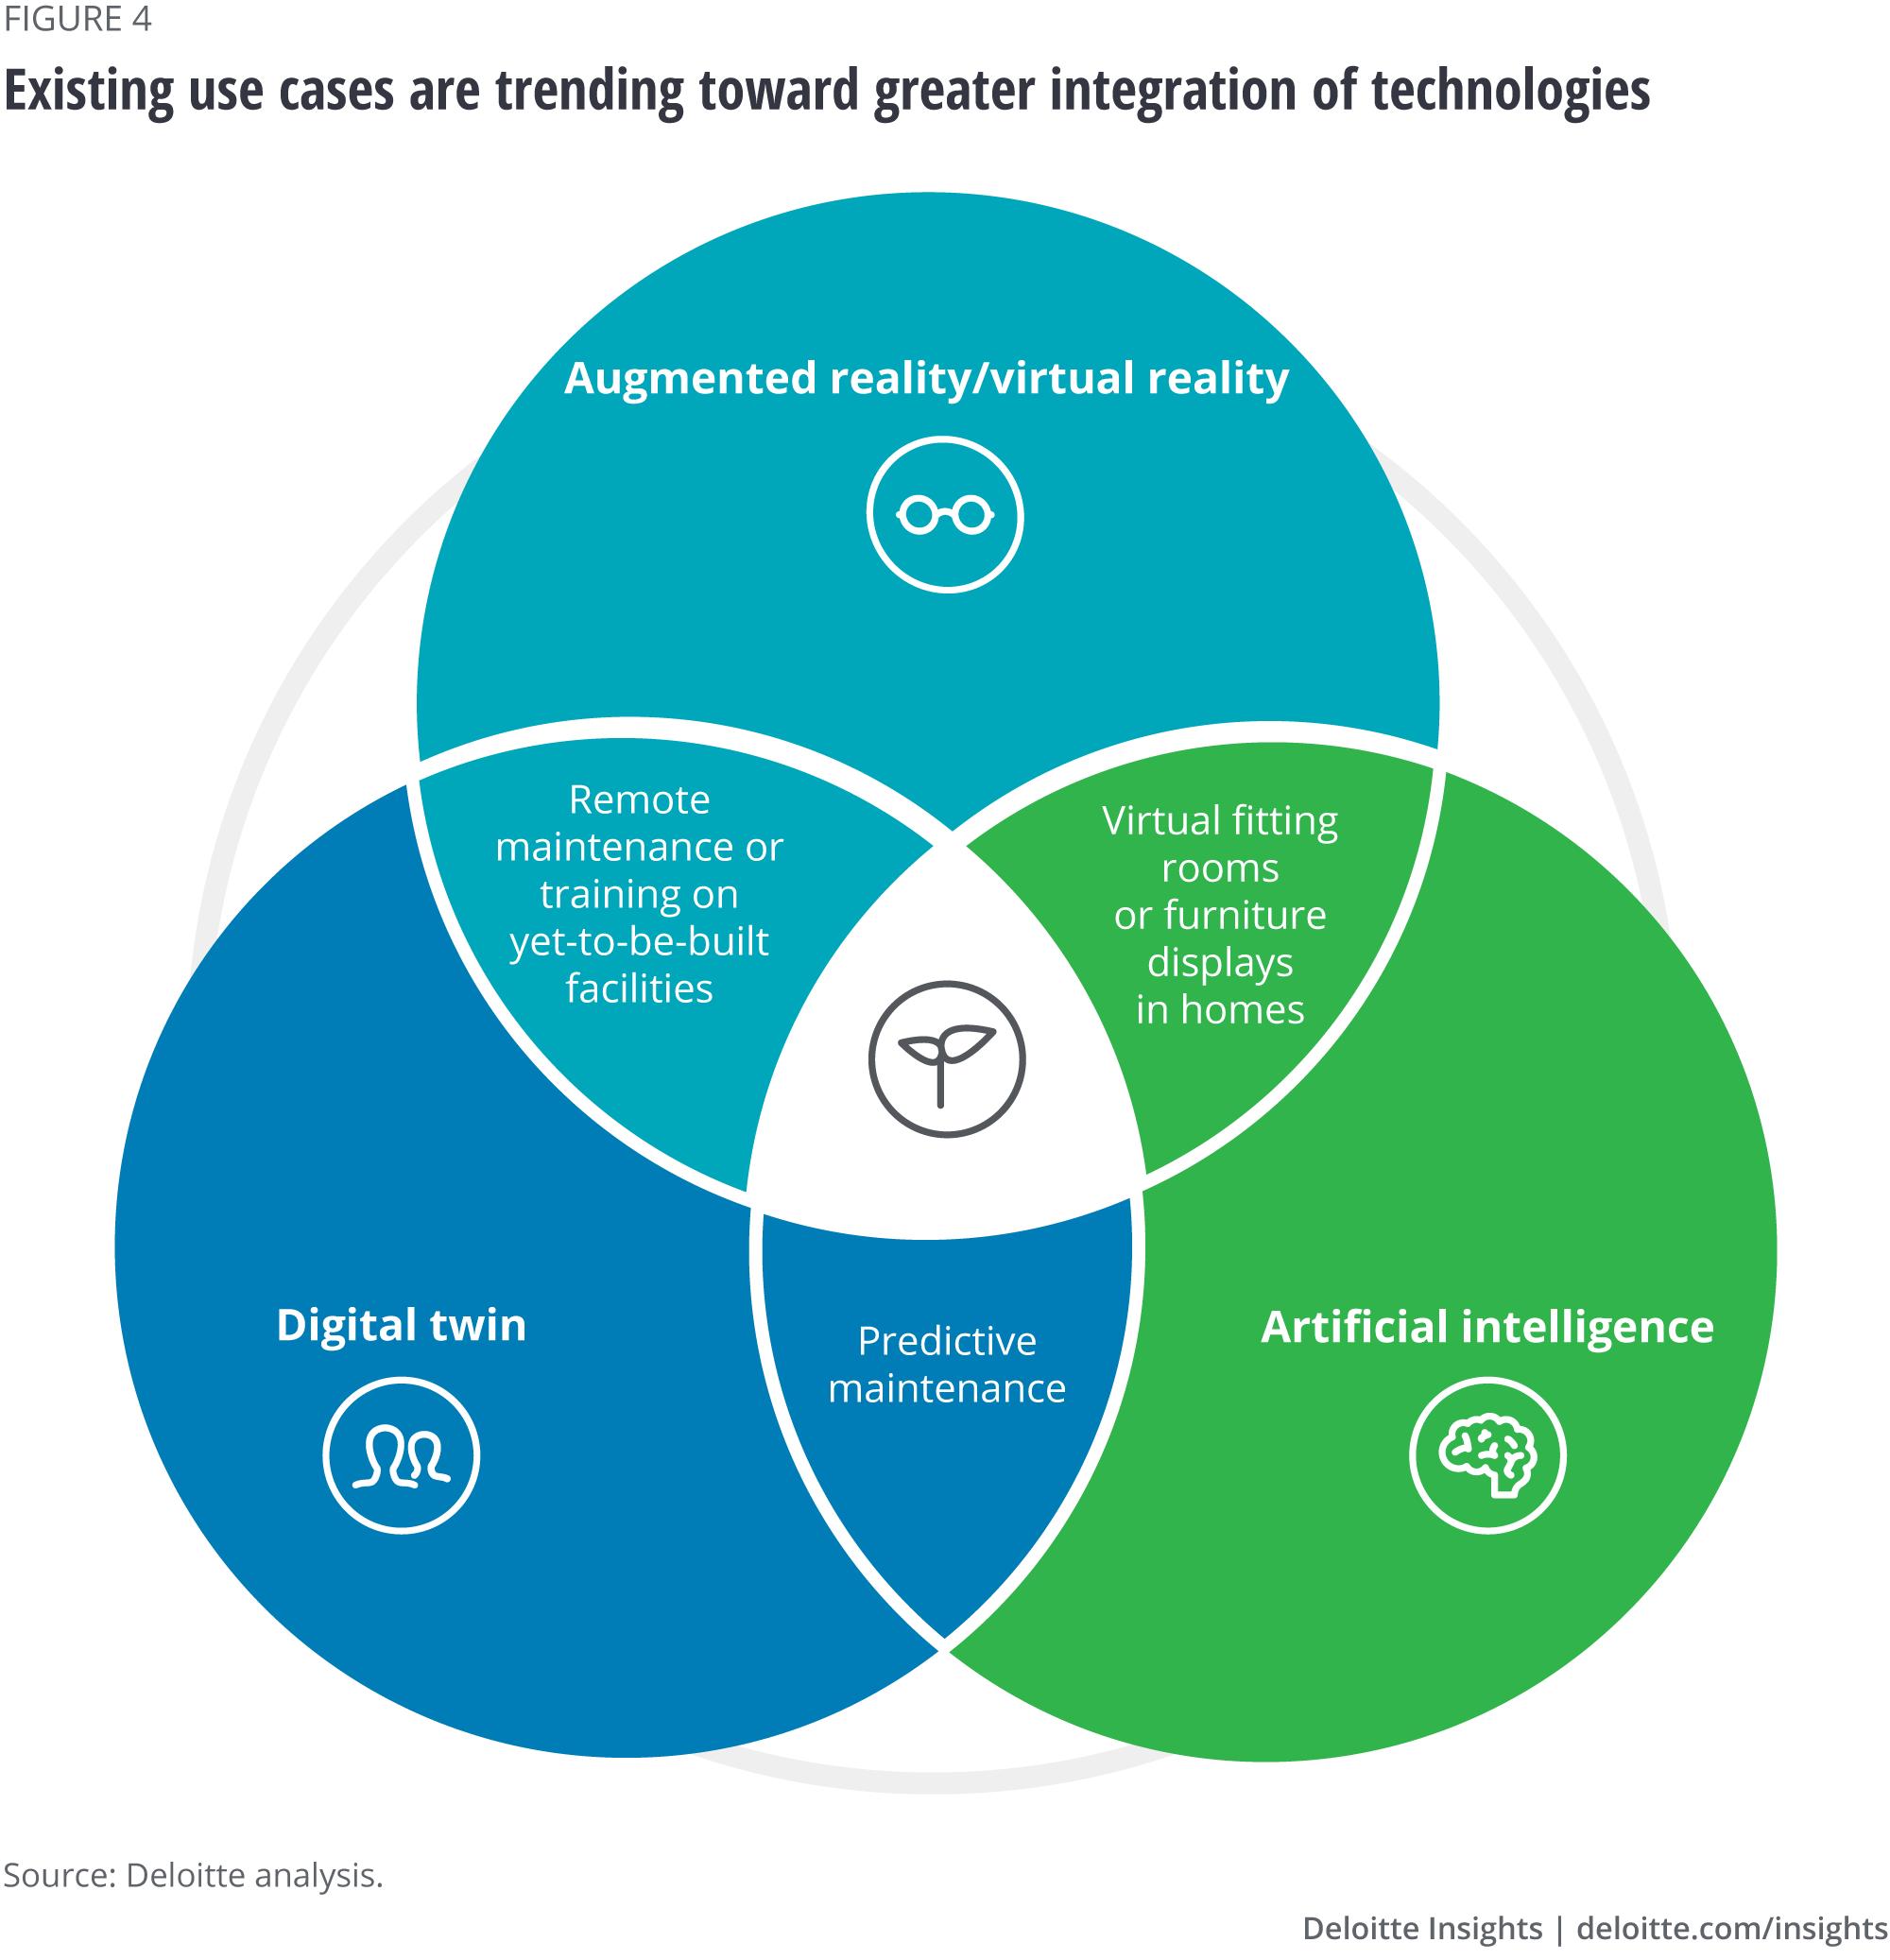 Existing use cases are trending toward greater integration of technologies